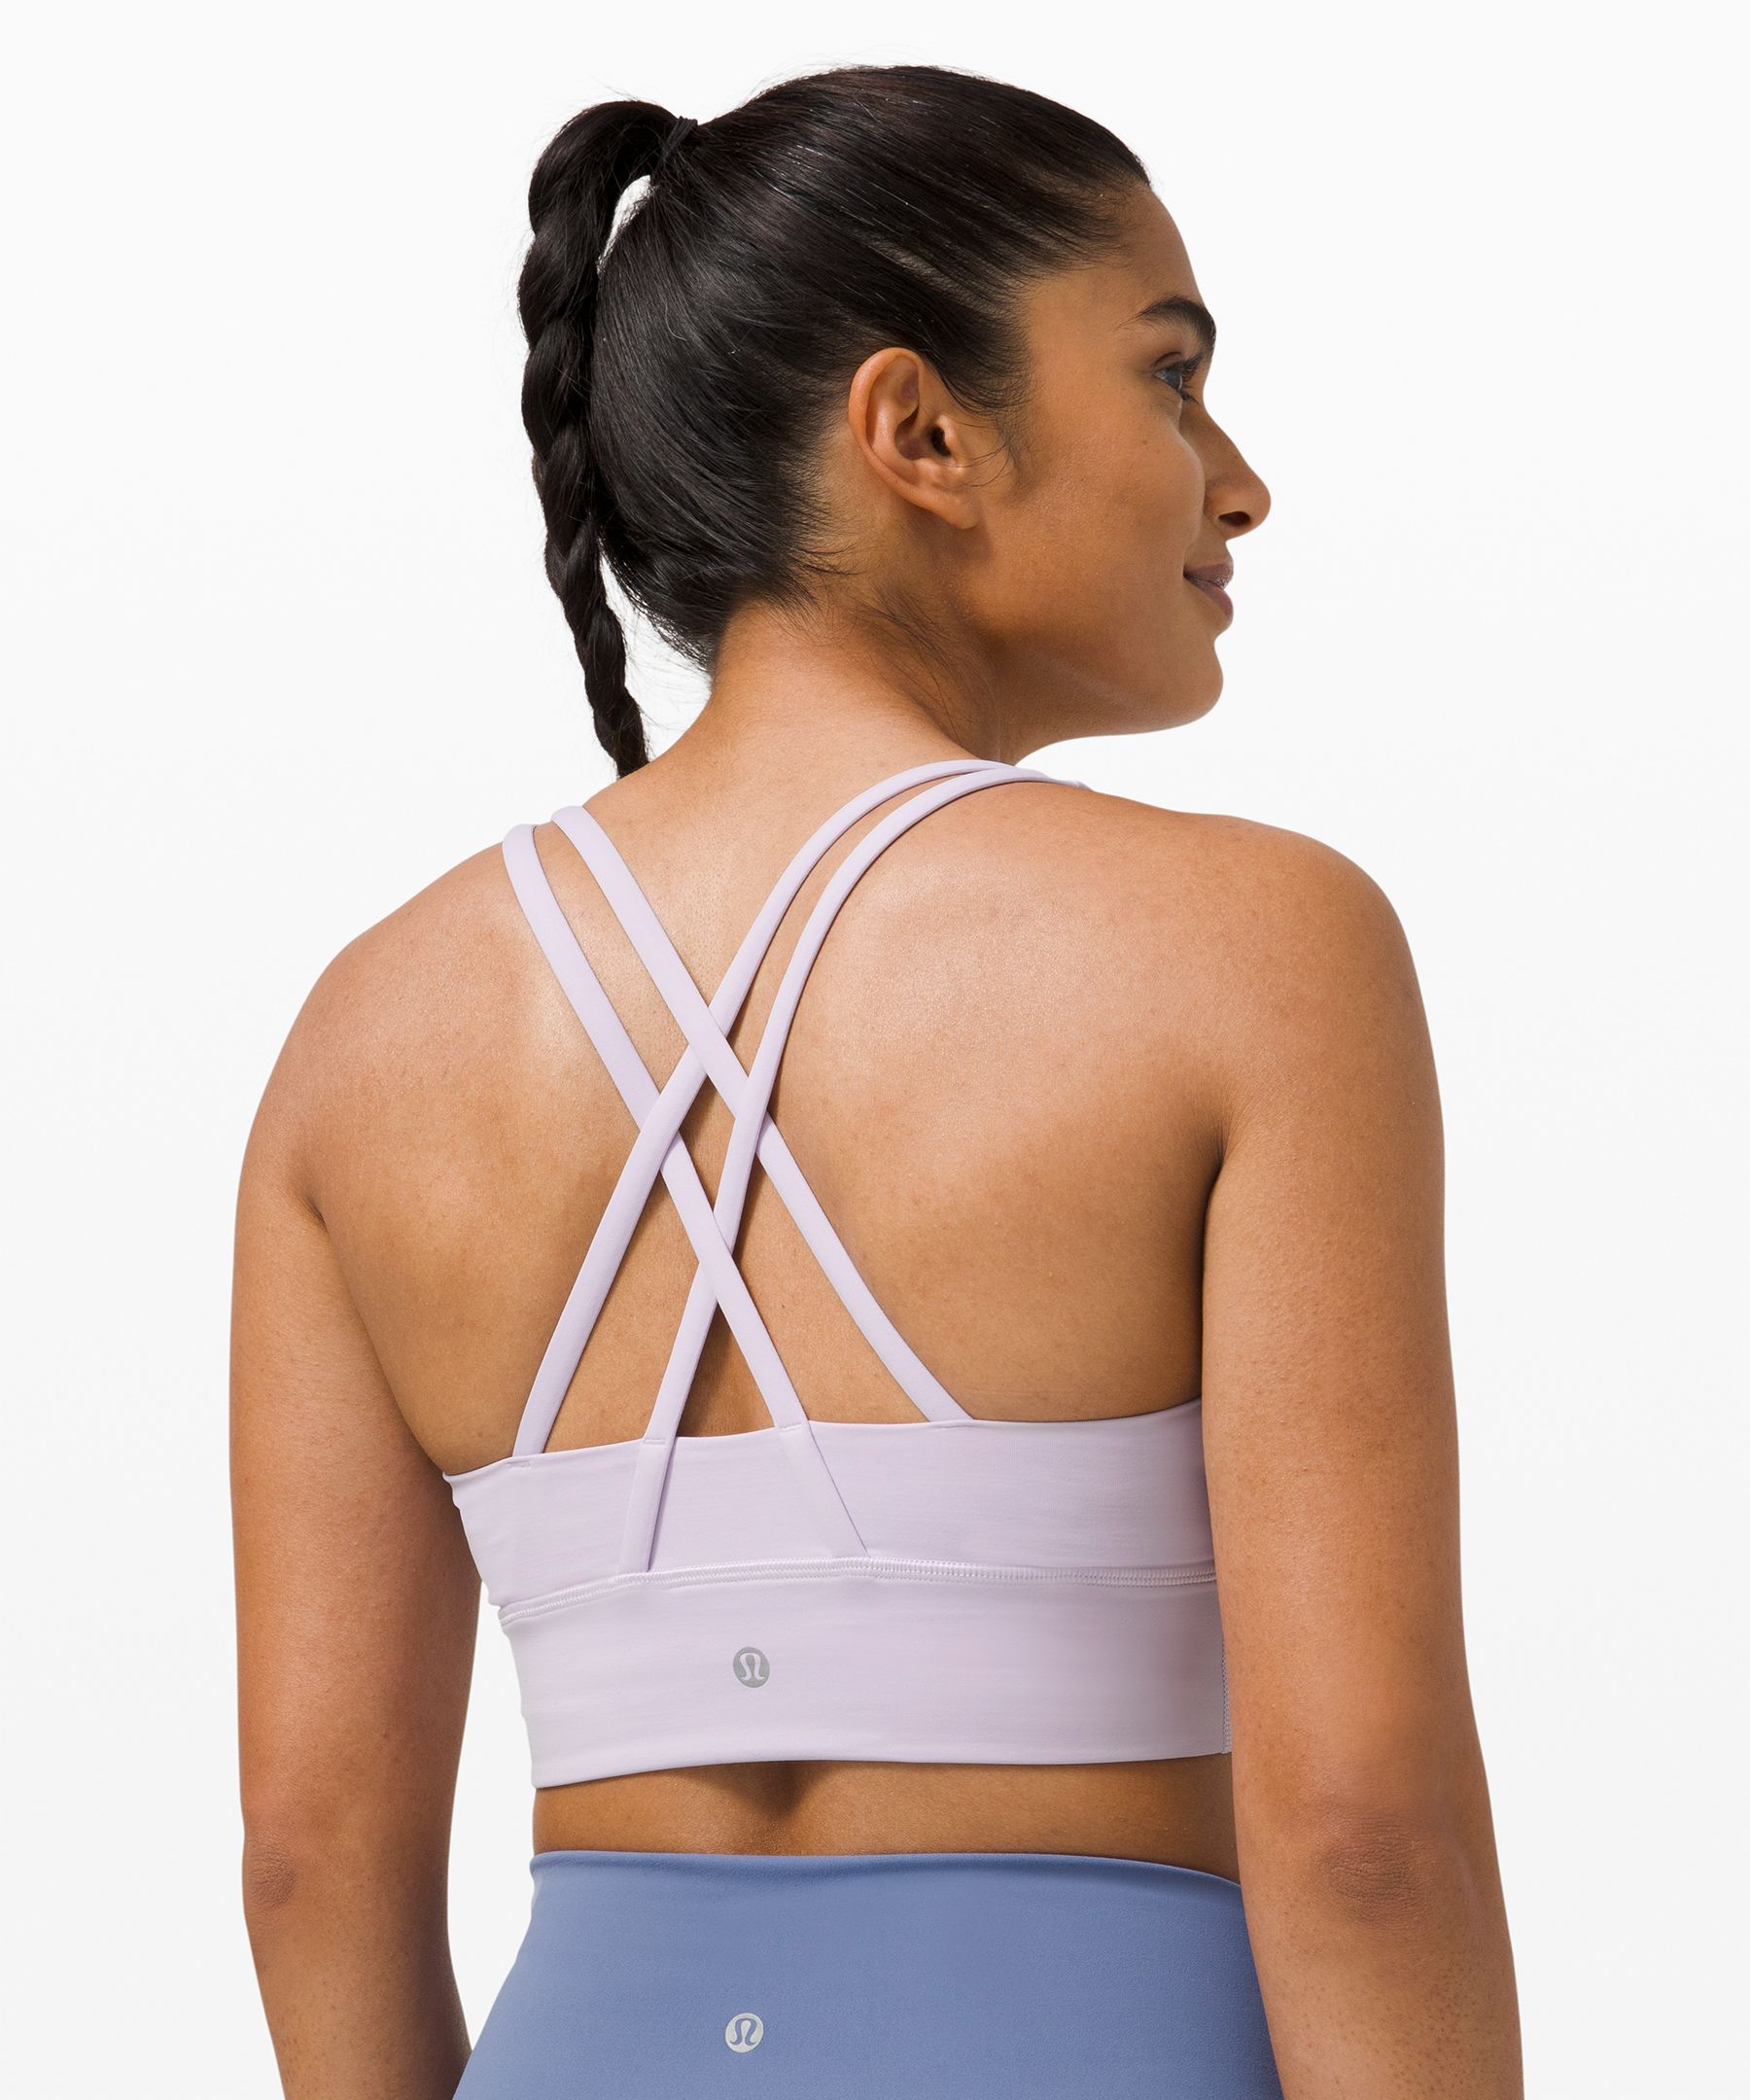 Lululemon Soleil Energy Bra Long Line Size 4 New with tag